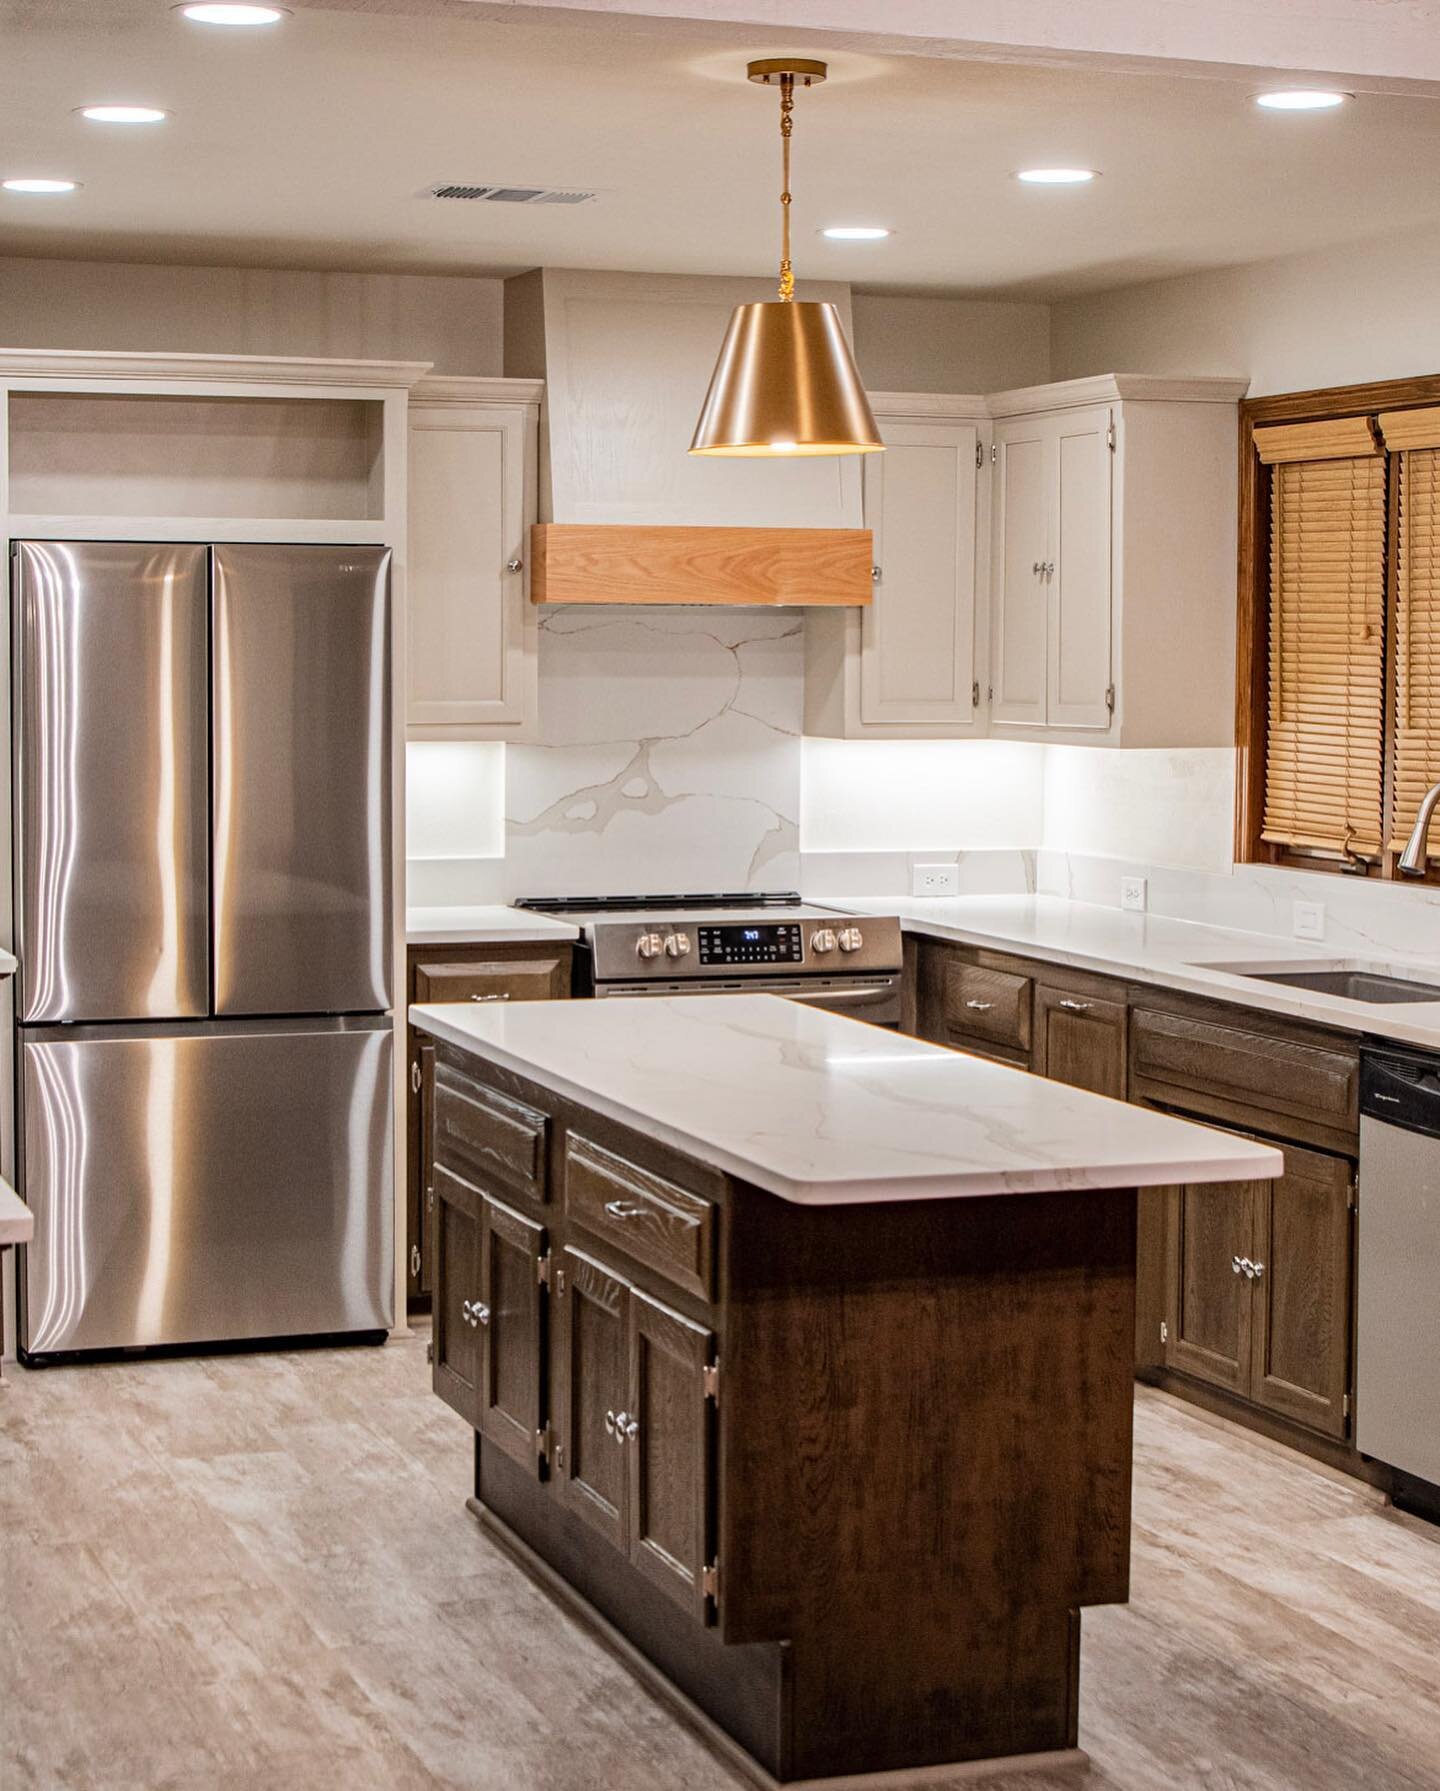 Cerused kitchen cabinets are a great way to add a touch of elegance and sophistication to your kitchen.

&bull;	Cerused cabinets are made by applying a special finish to the wood that highlights the natural grain.

&bull;	This gives the cabinets a so